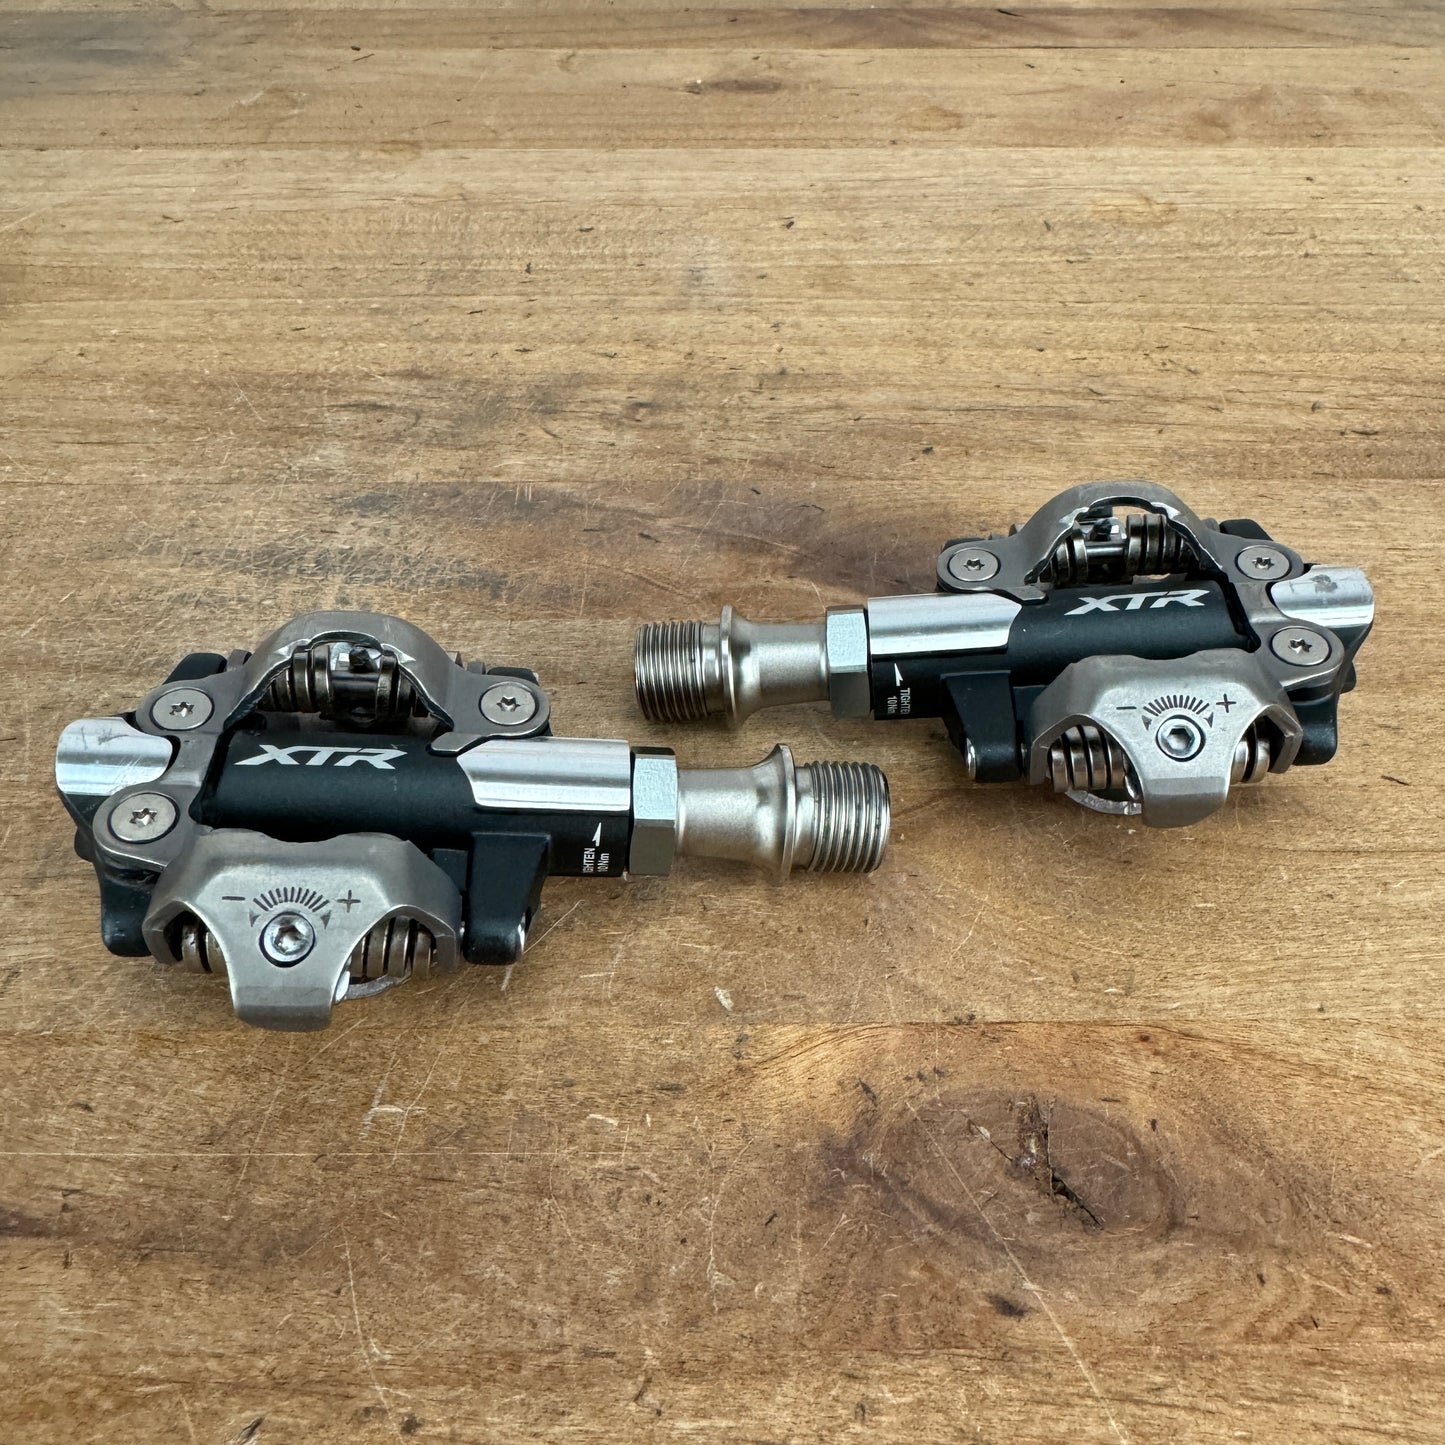 Light Use! Shimano XTR PD-M9100 55mm Axle Clipless Mountain Bike Pedals 300g